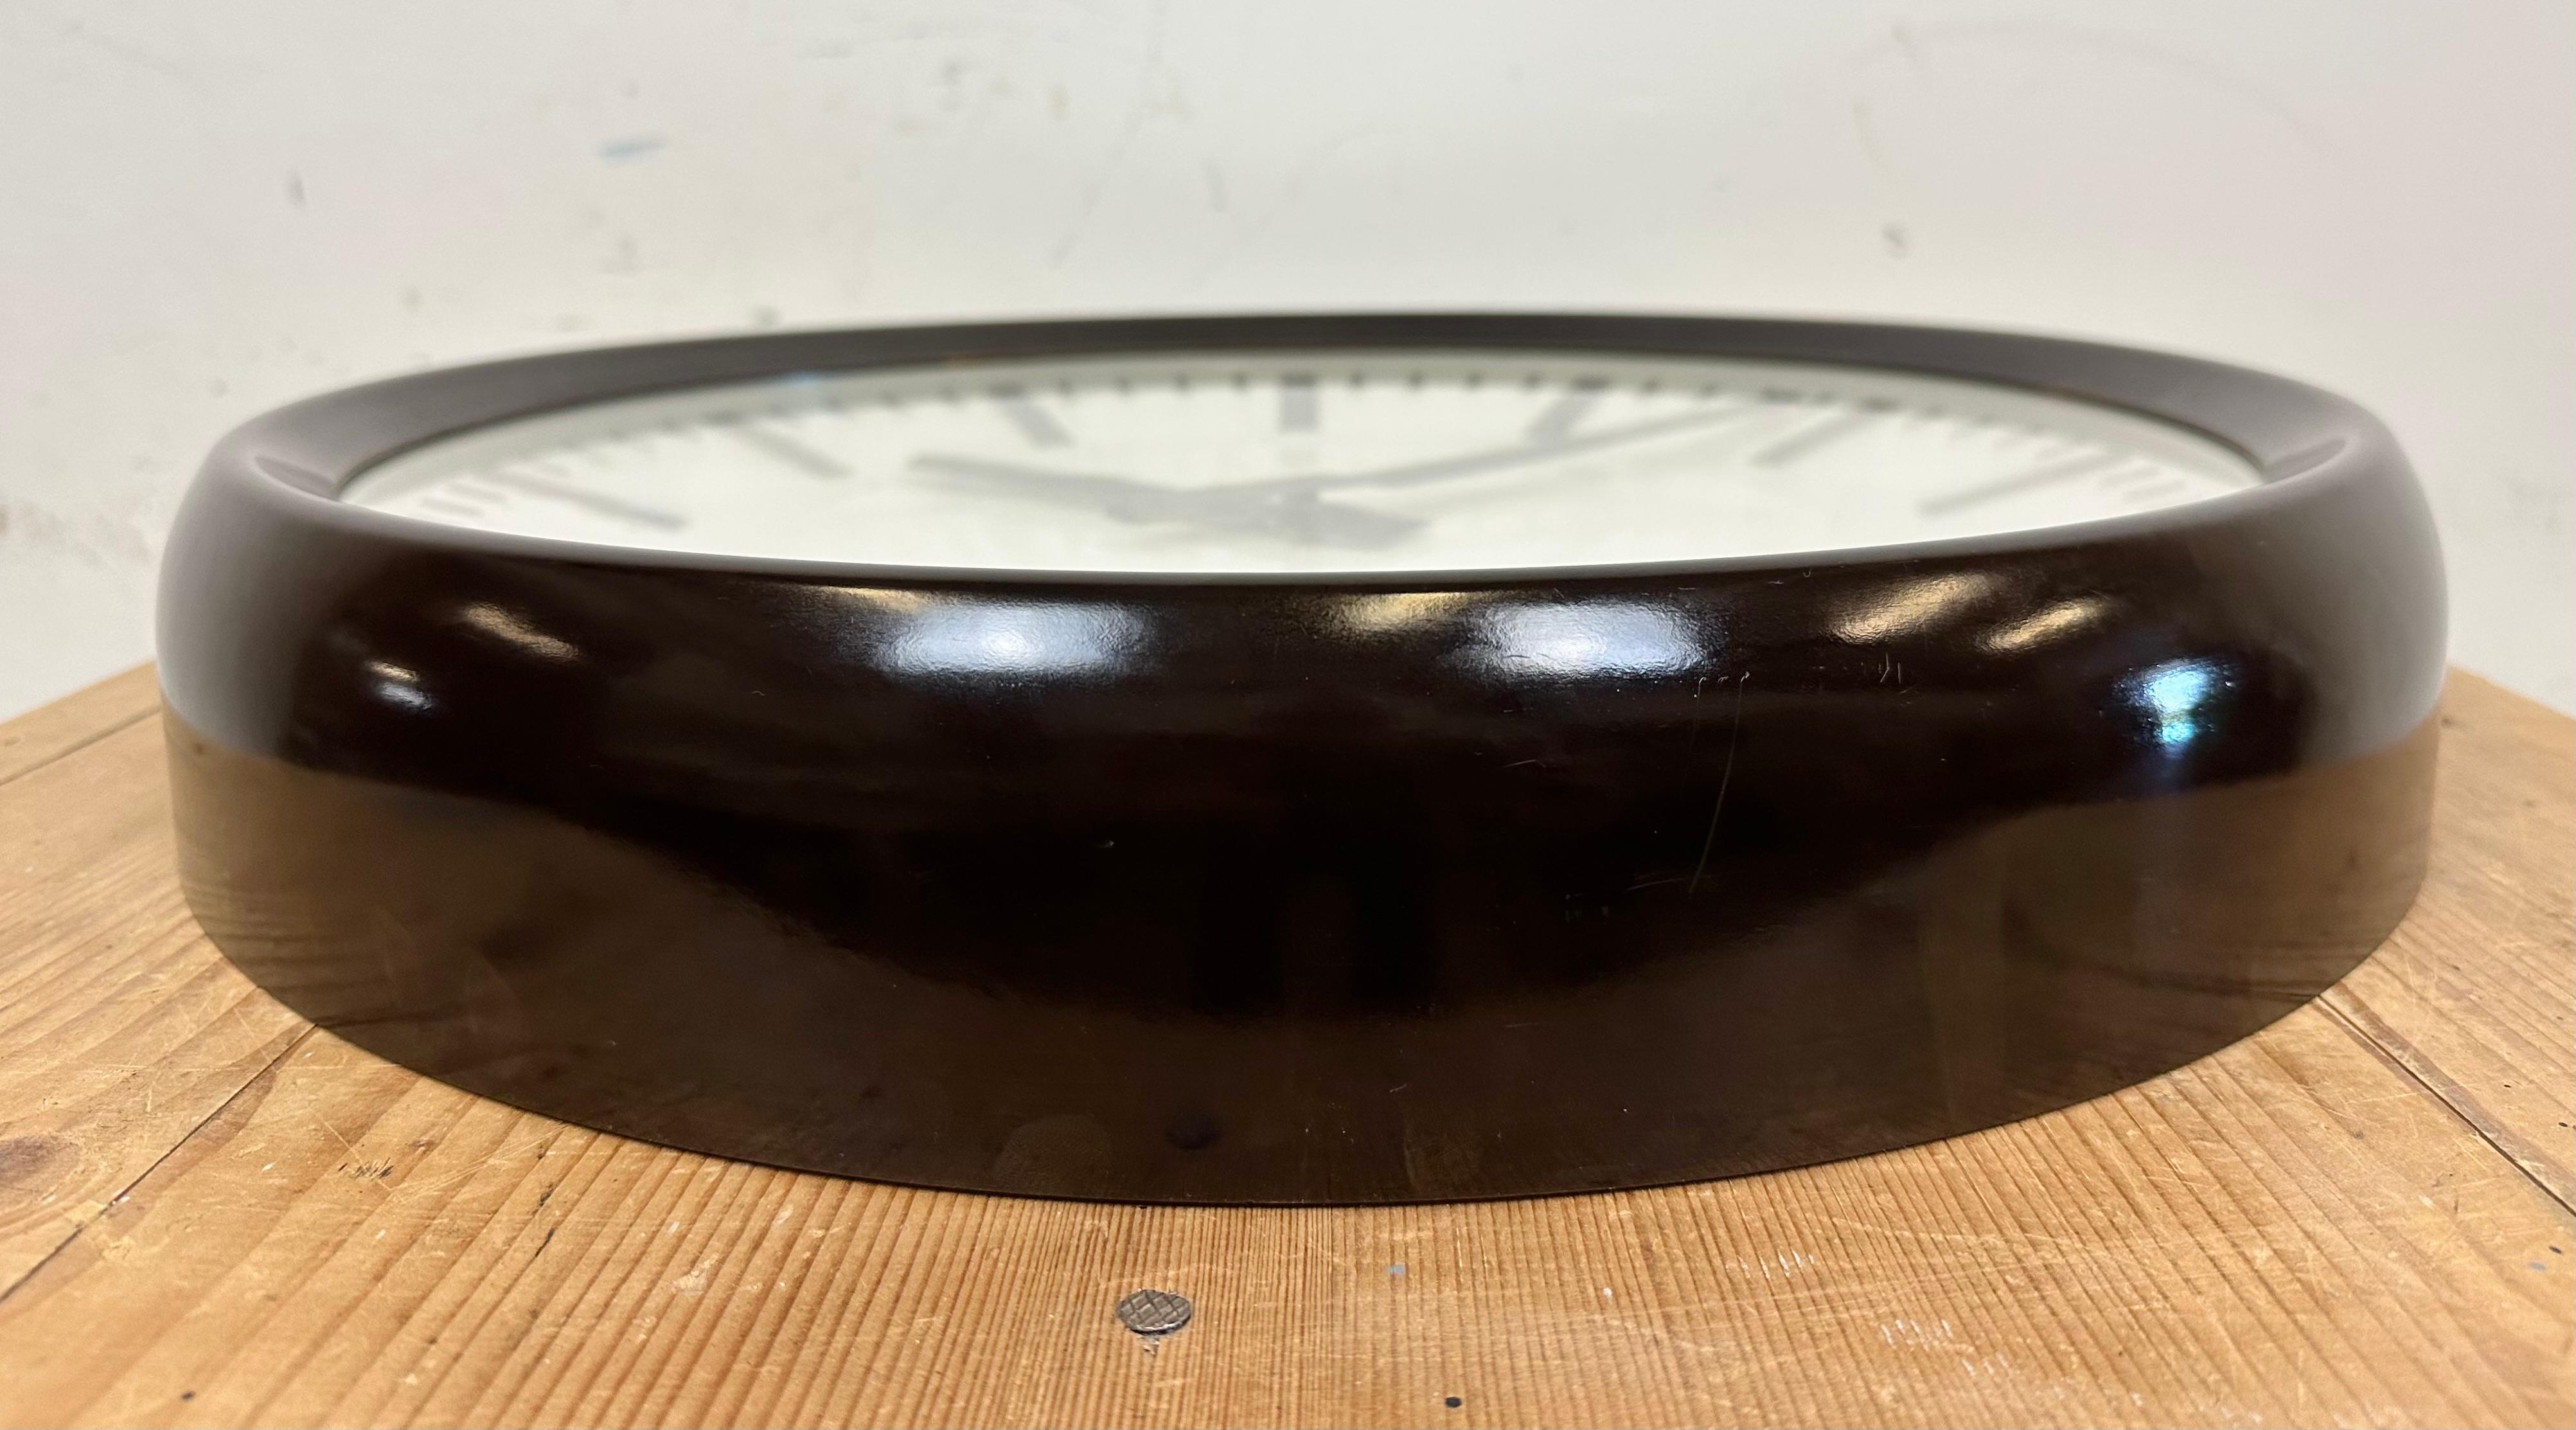 Large Industrial Bakelite Factory Wall Clock from Pragotron, 1960s For Sale 3